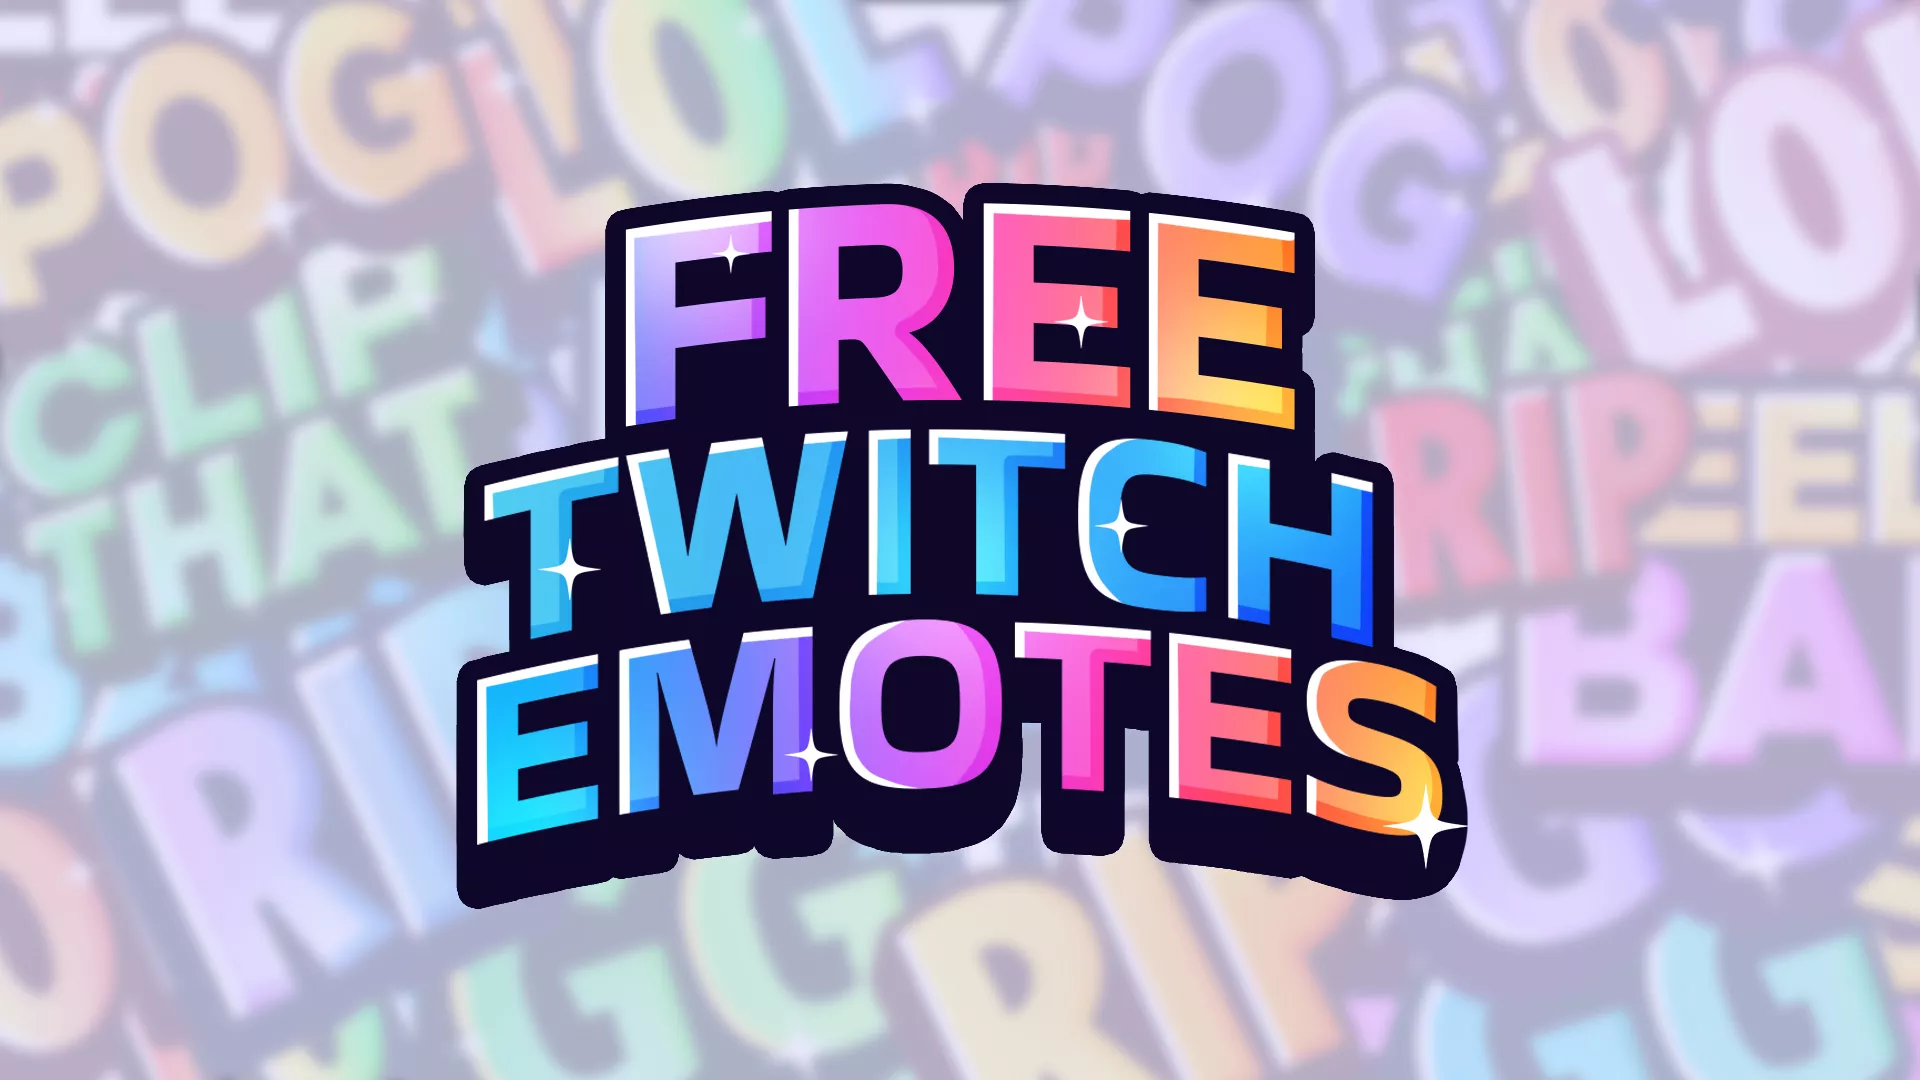 Free Twitch Text Emotes - Main Image